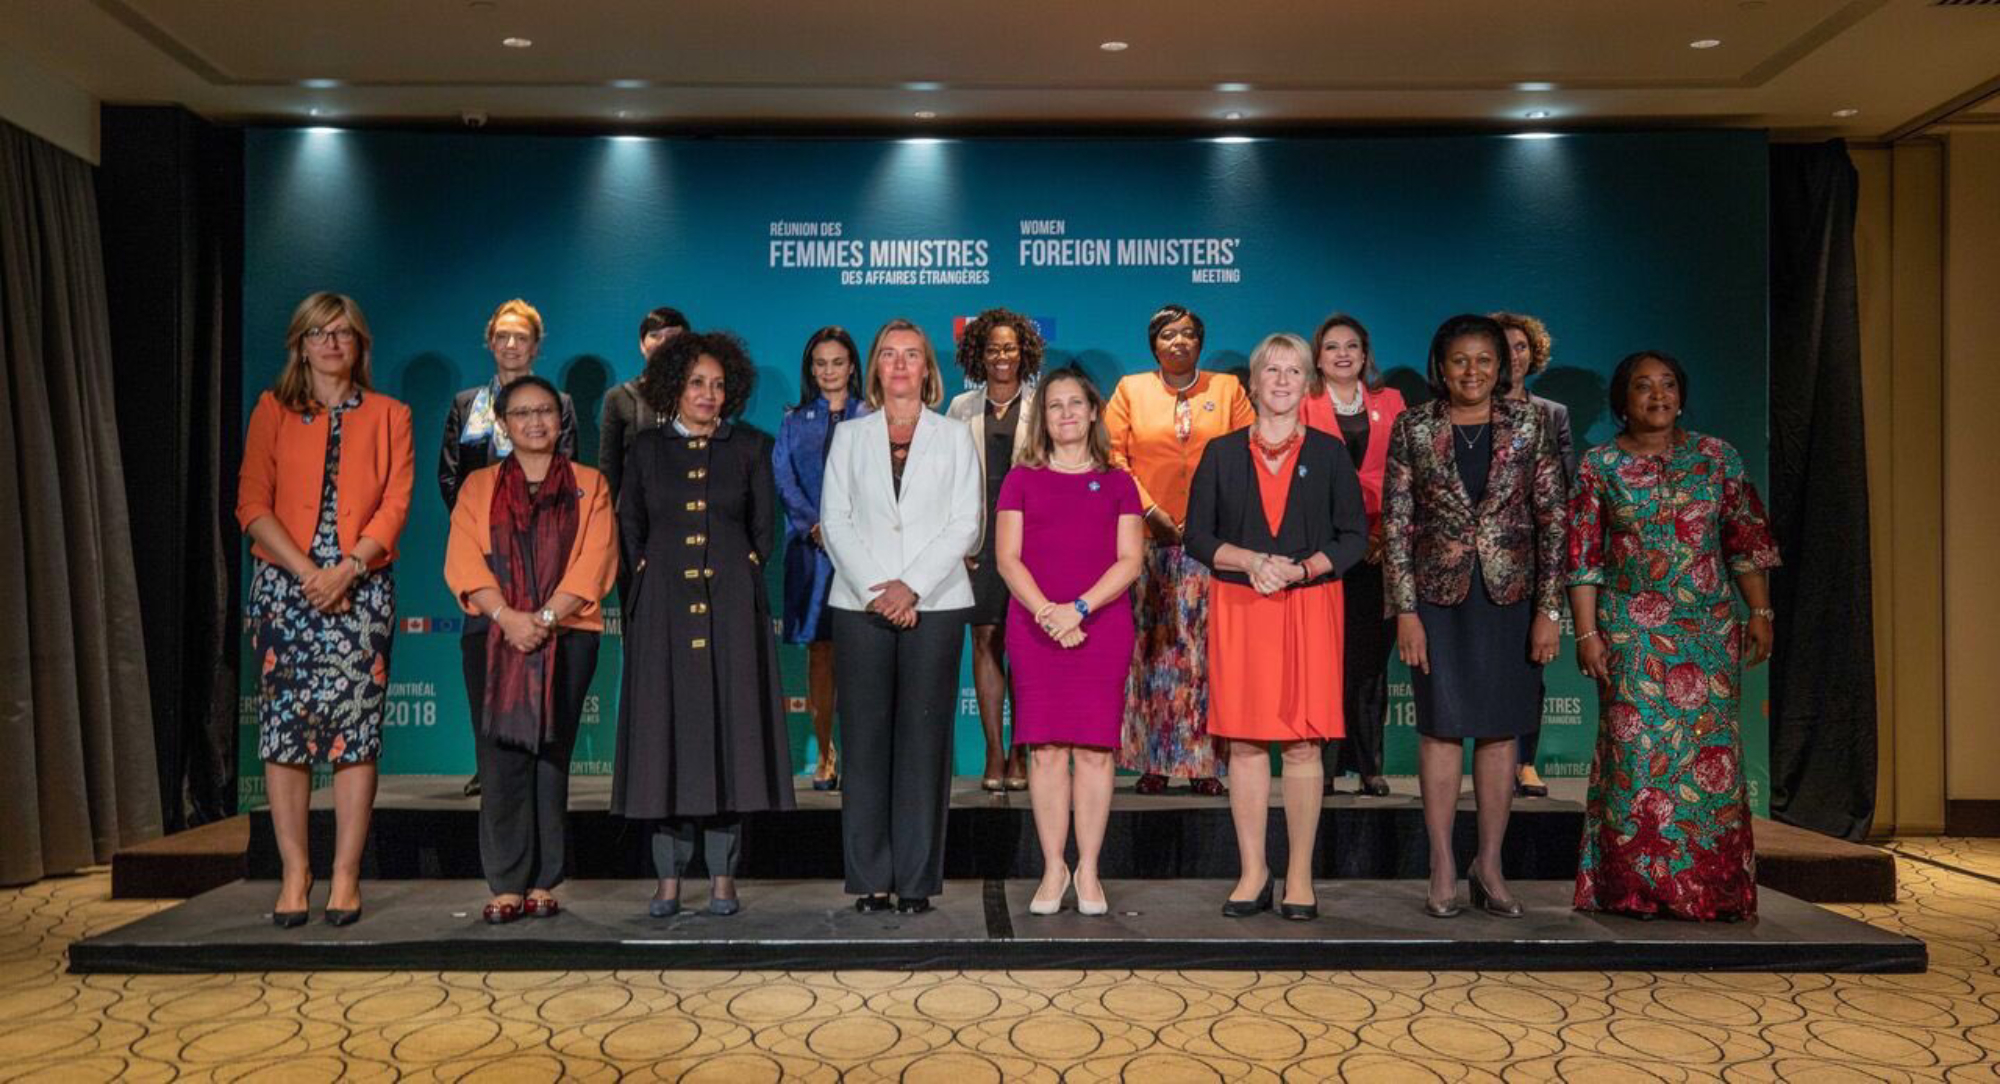 Women Foreign Ministers’ Meeting (WFMM) in Montréal, September 2018. Photo from Twitter profile of Pelayo Castro.